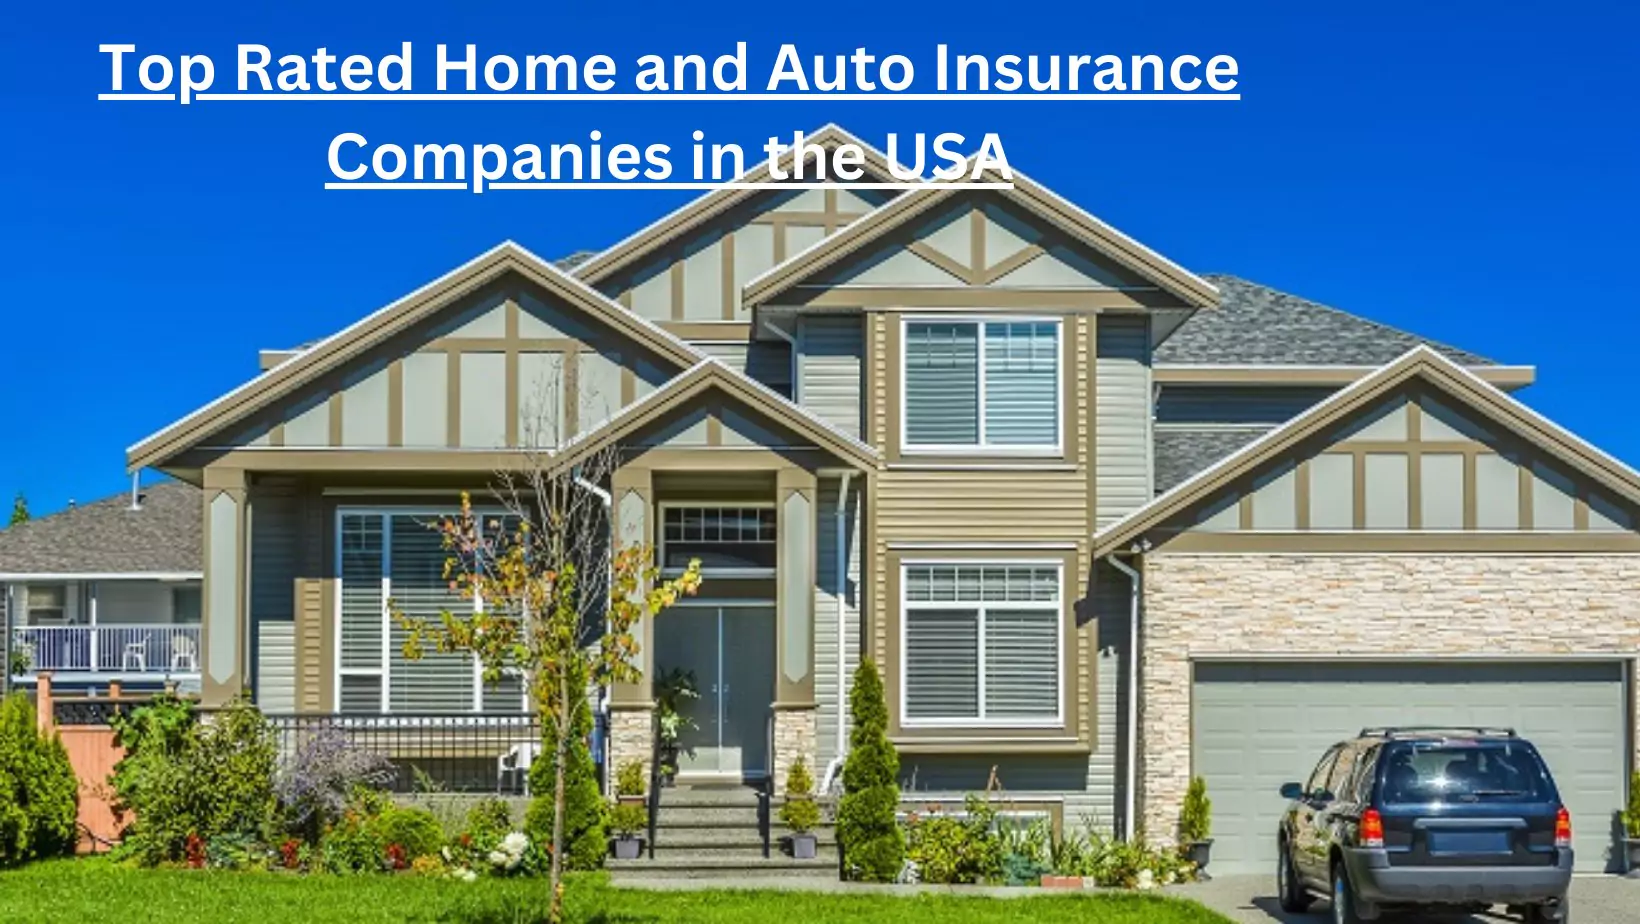 Top Rated Home and Auto Insurance Companies in the USA